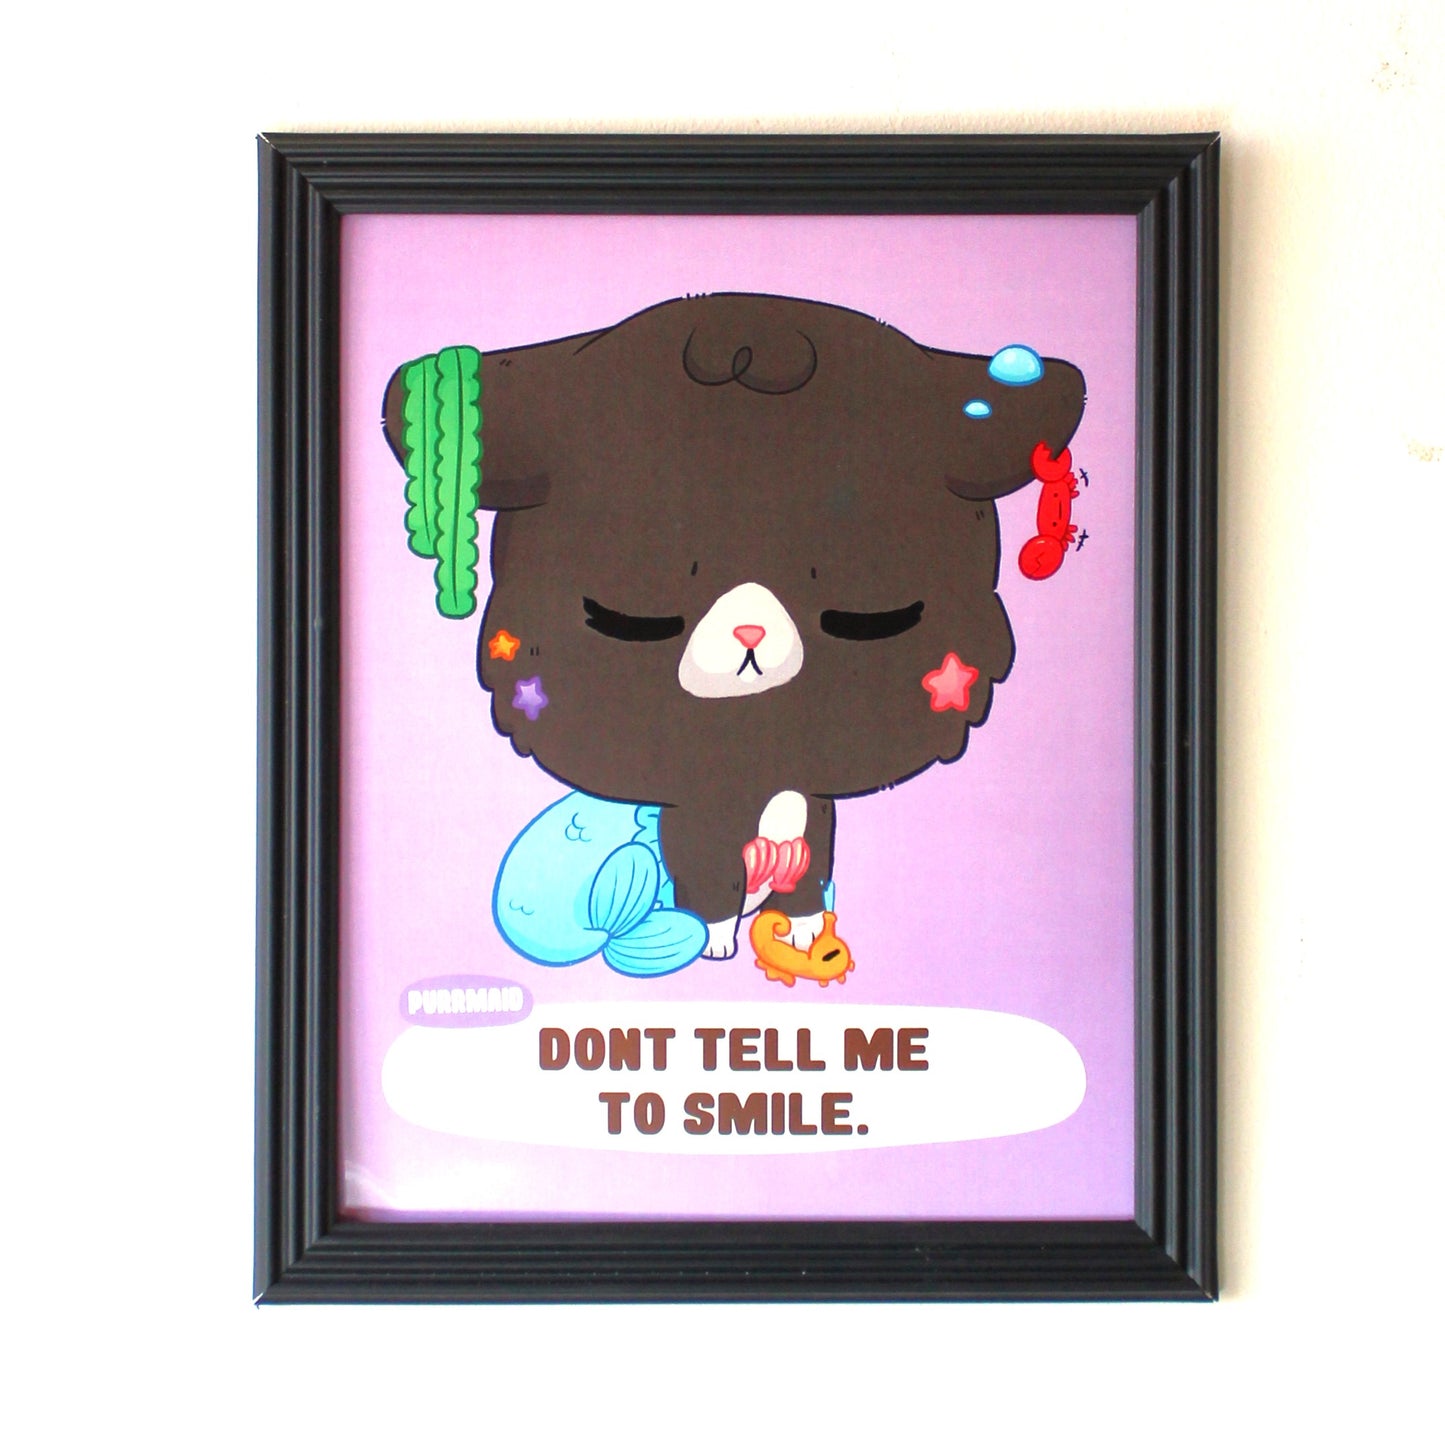 "Dont Tell Me to Smile" 8 x 10 inch Art Print.